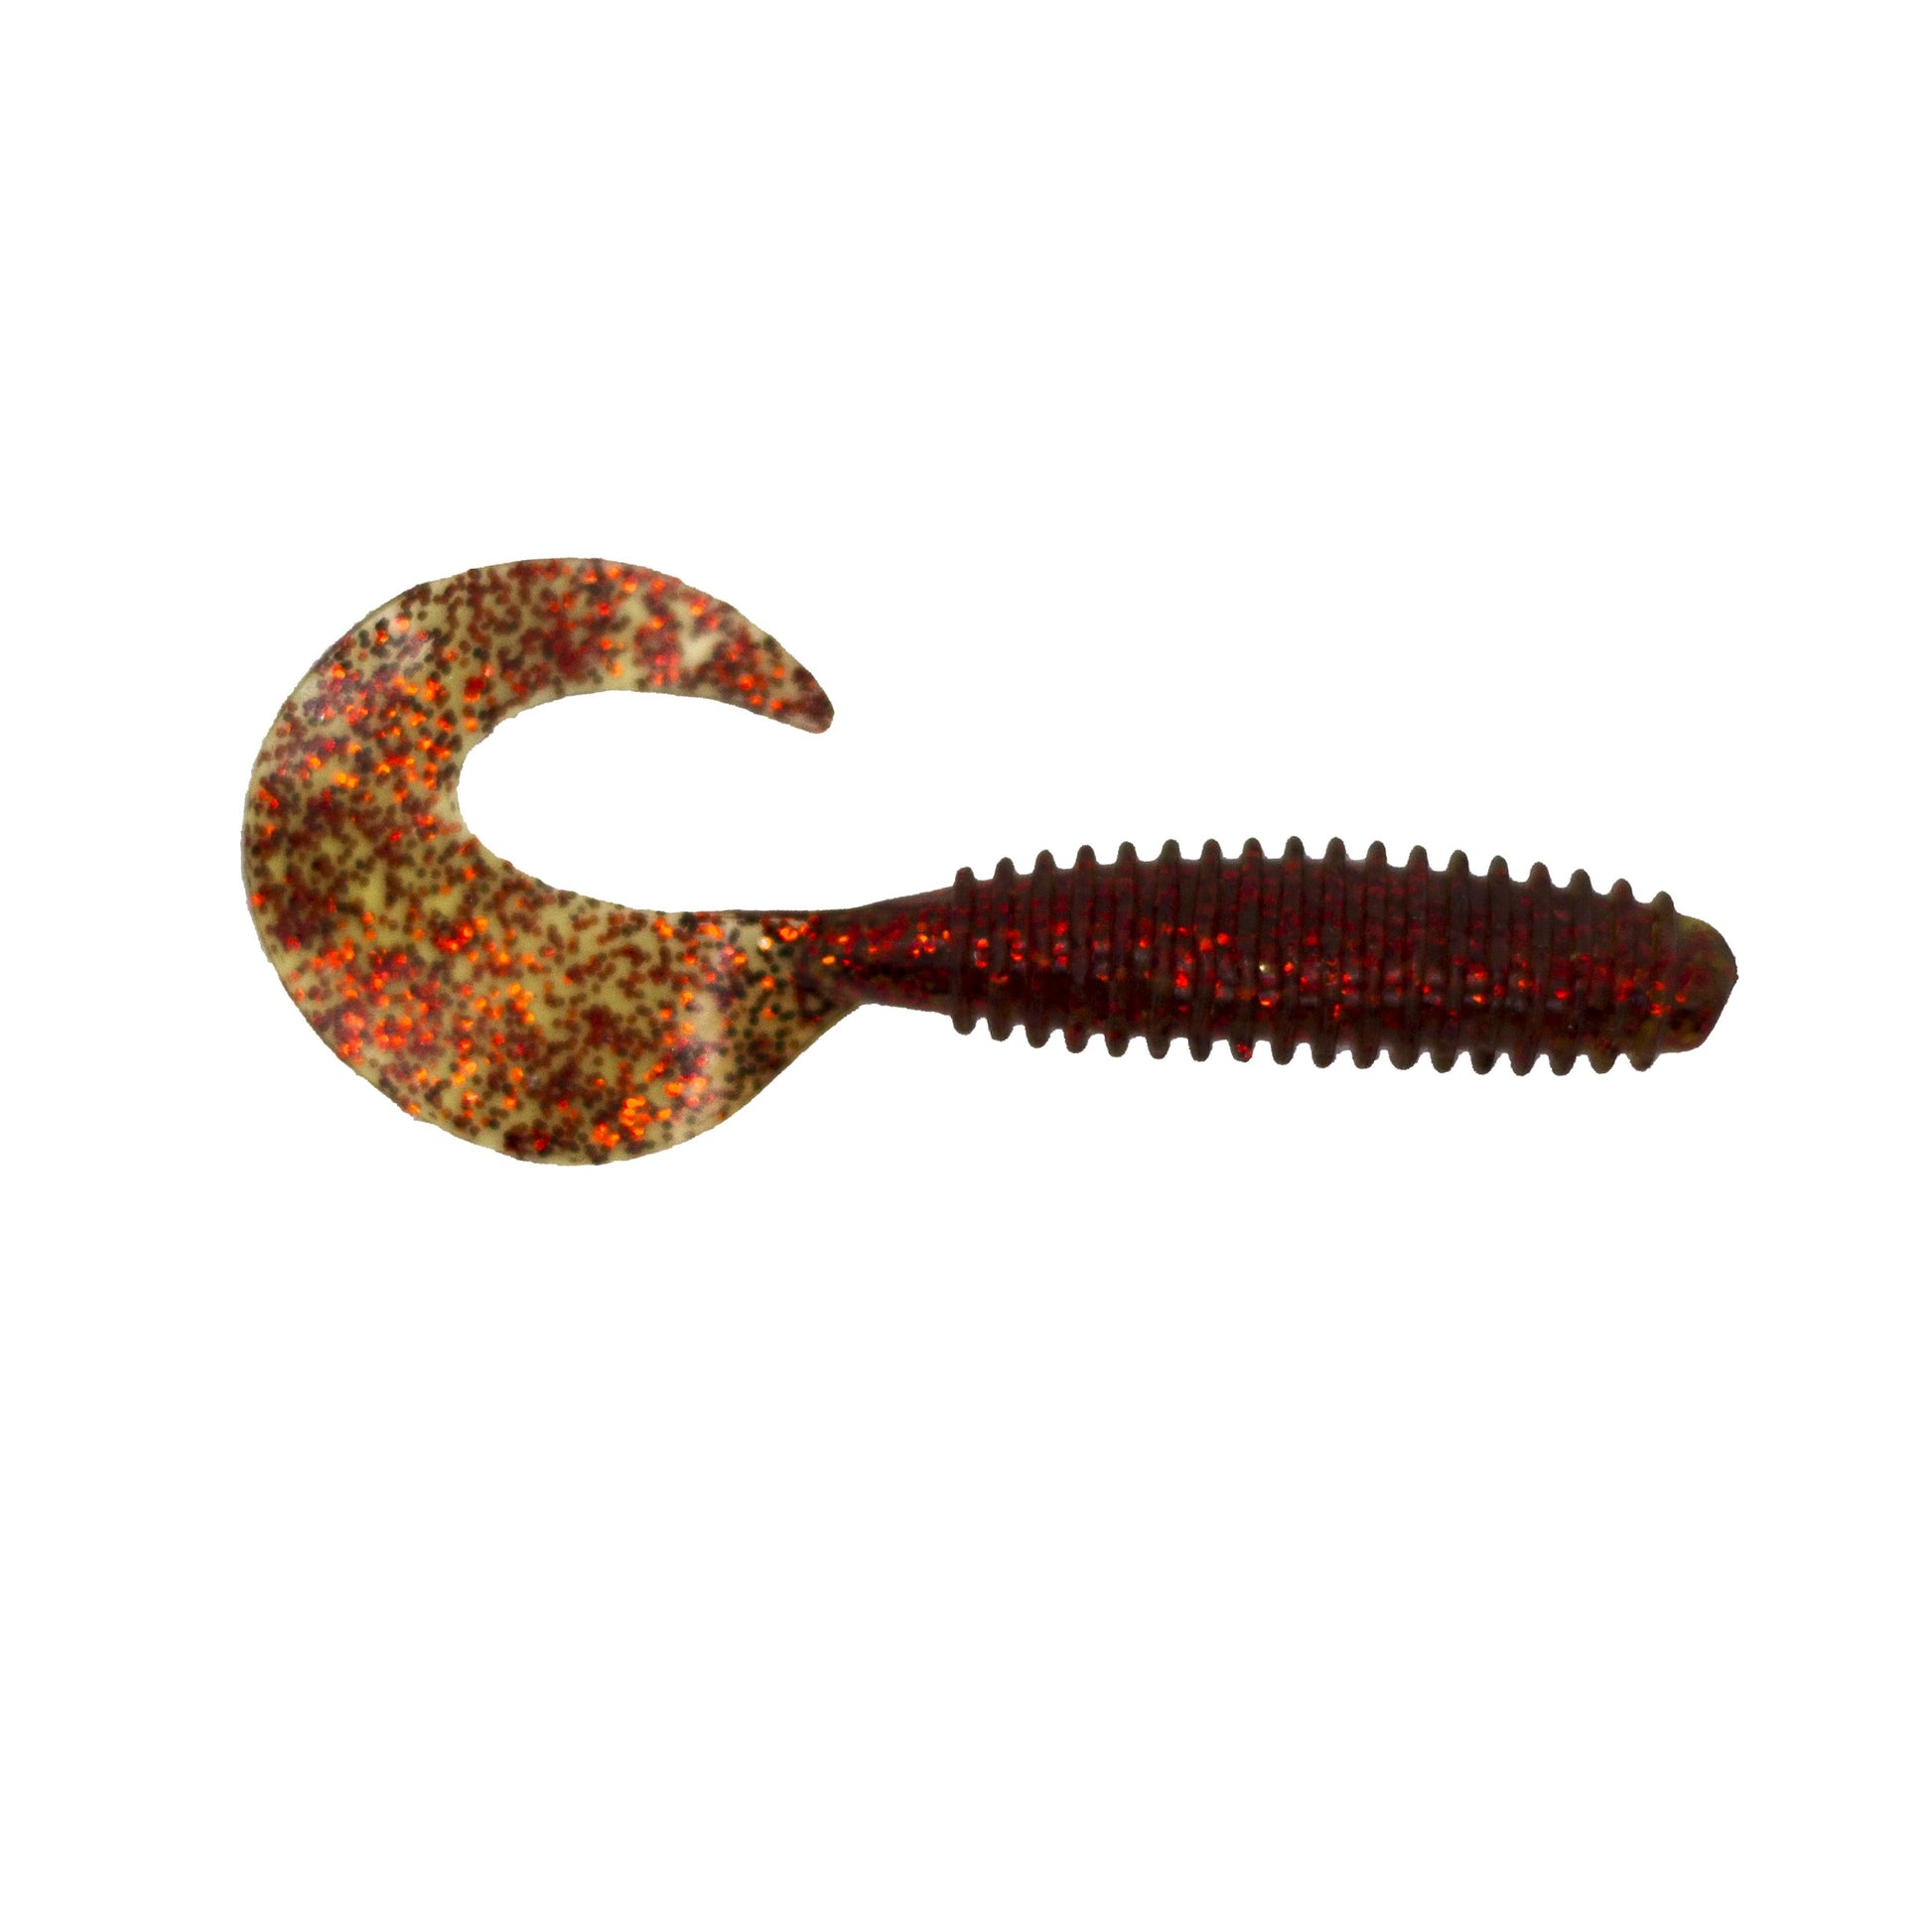 Fishing Depot Dusted Curl Tail Grub Twister, 2.5-in - Discount Fishing  Tackle - Soft Bait